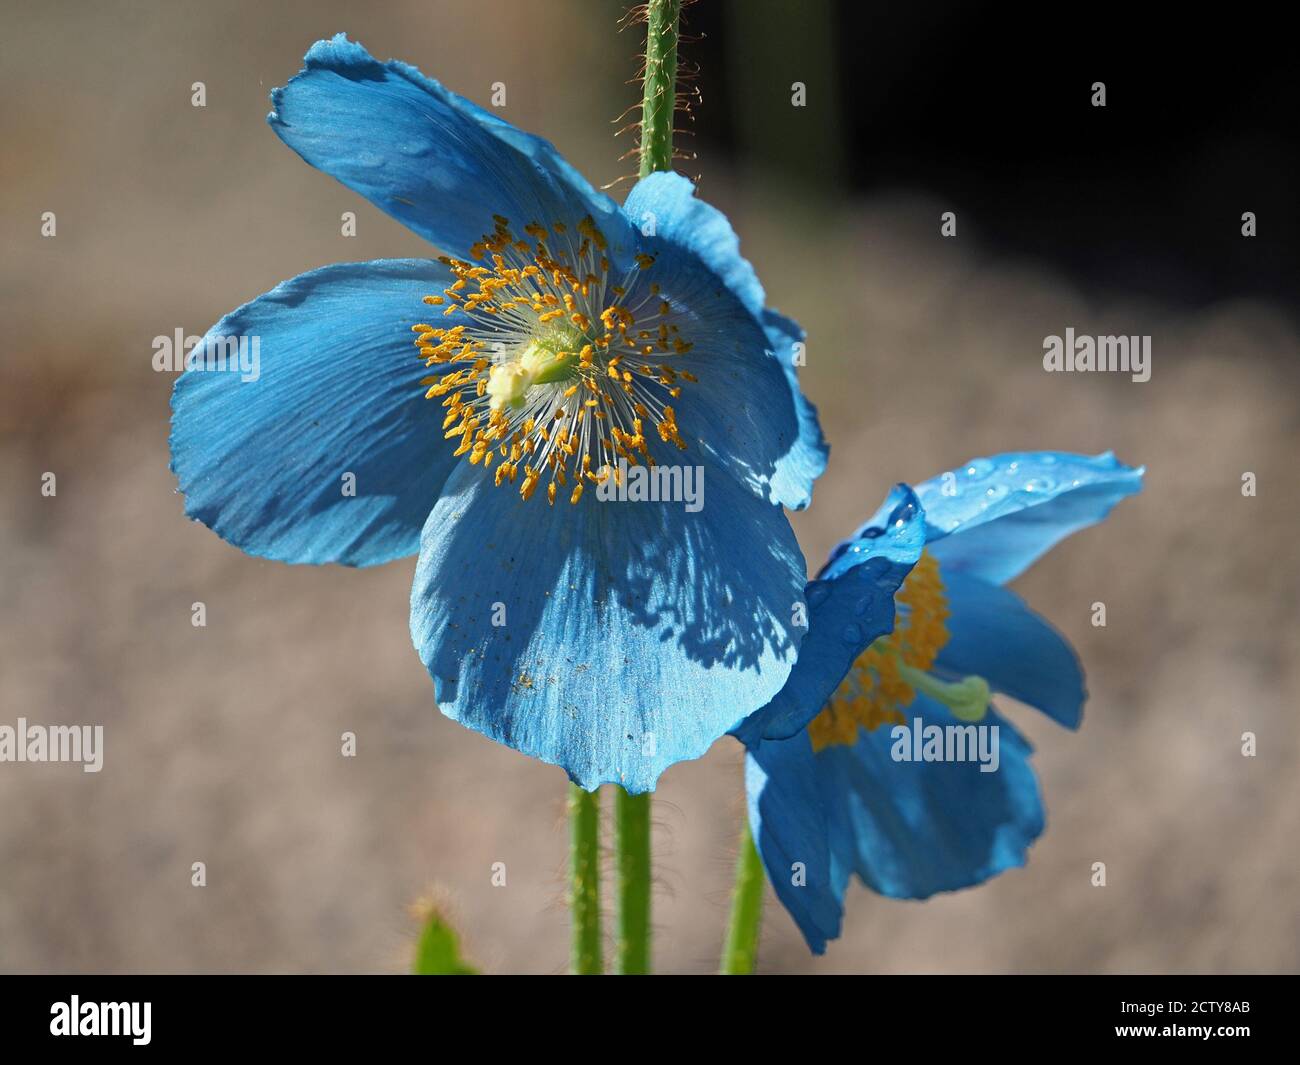 sparkling drops of dew on bright iridescent azure petals of Himalayan Blue Poppy (Meconopsis grandis) with green hairy stems against clear background Stock Photo